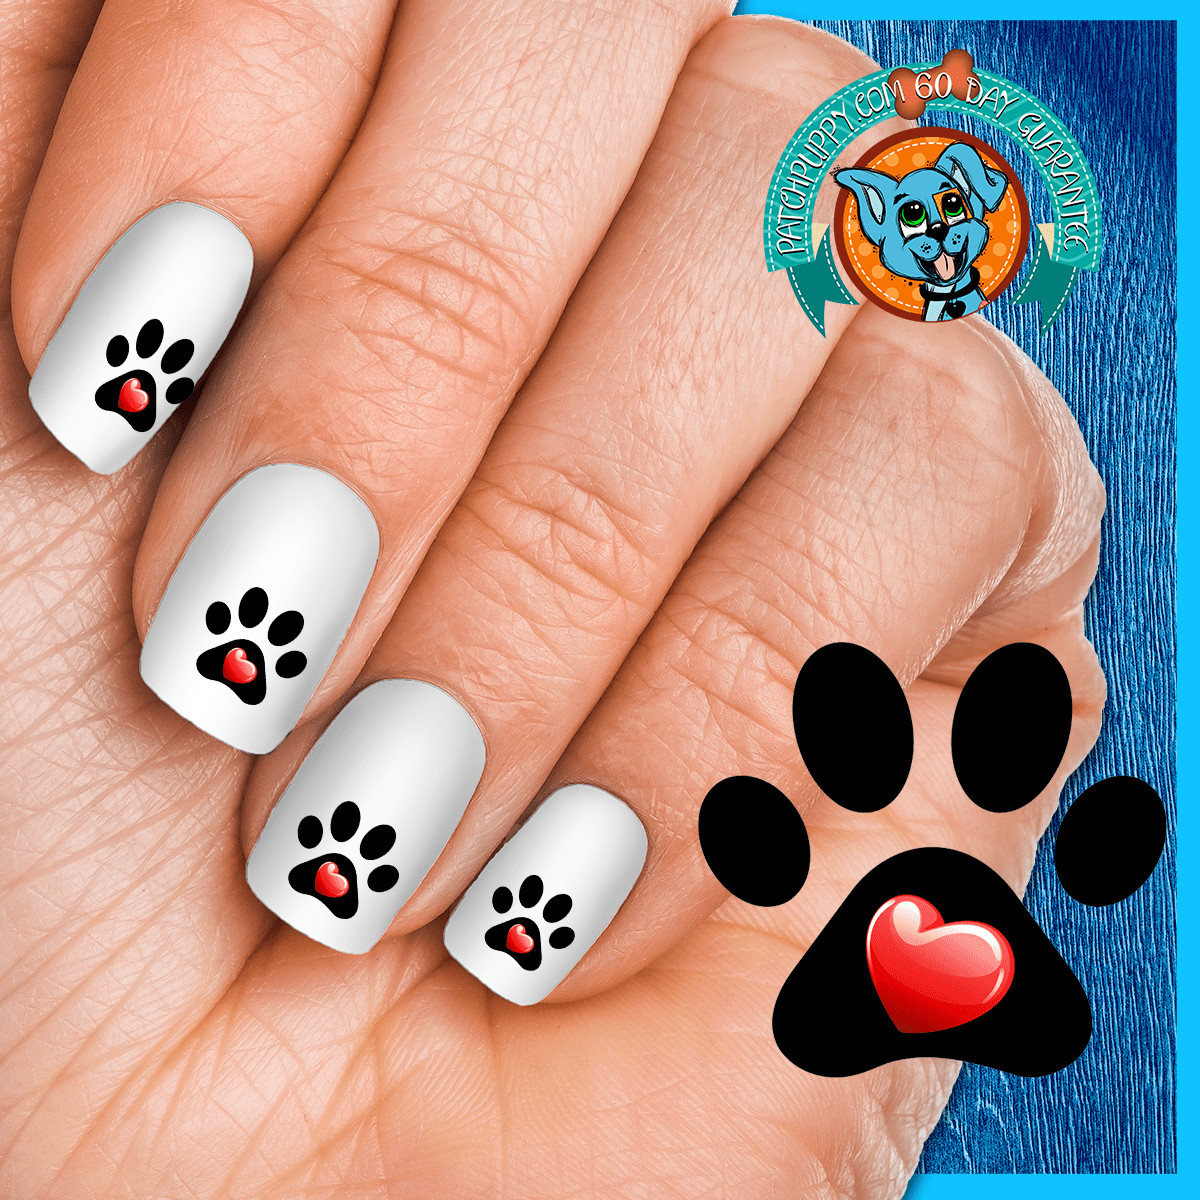 Paw Print Nail Designs
 My Heart Paw Print Nail Art Decals Now more FREE